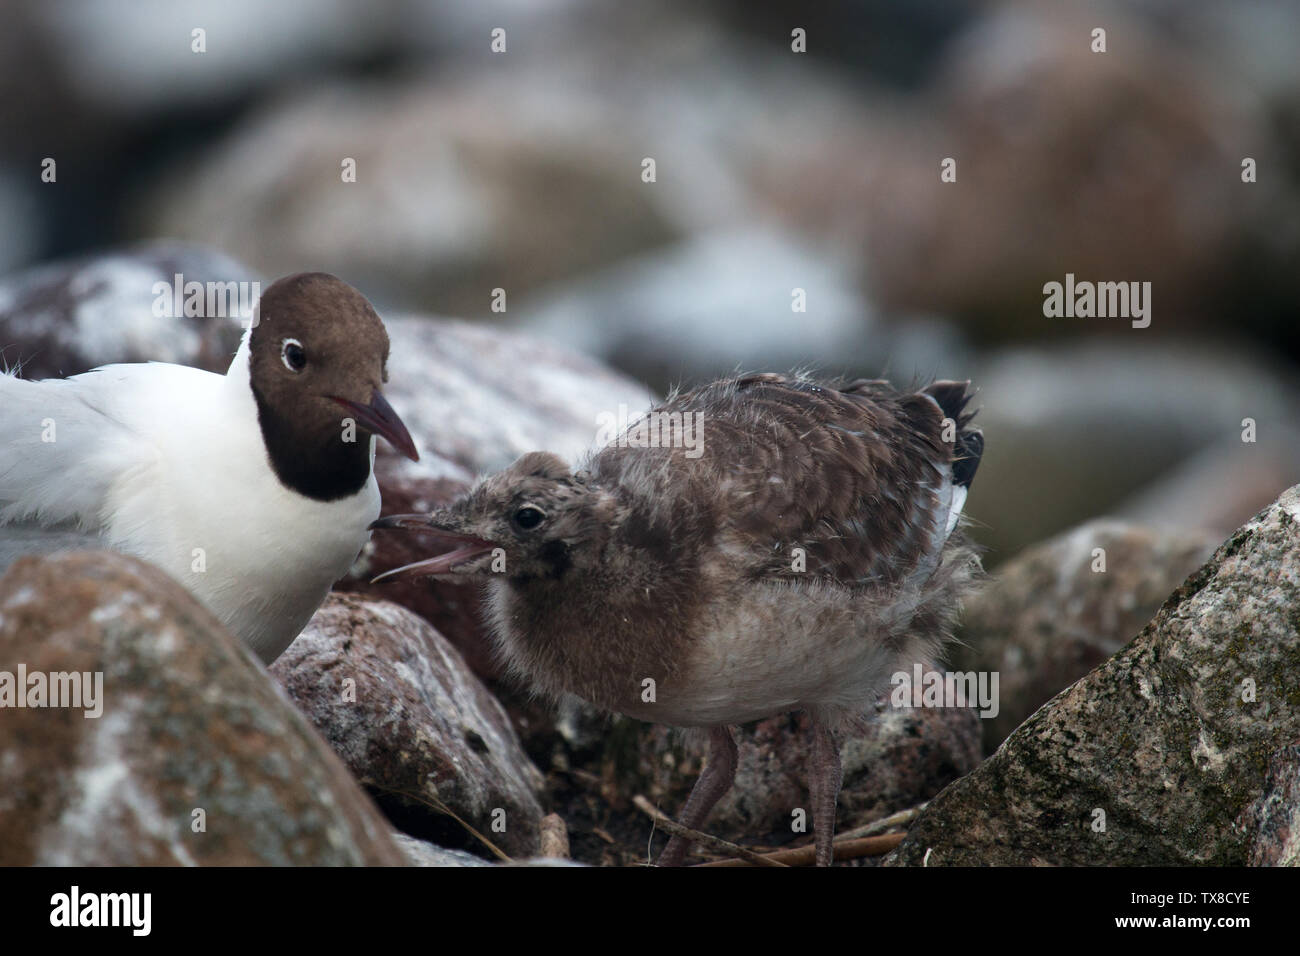 Black-headed gulls (Larus ridibundus) feed their Chicks belching brought food, Chick begging for food, caring for offspring Stock Photo